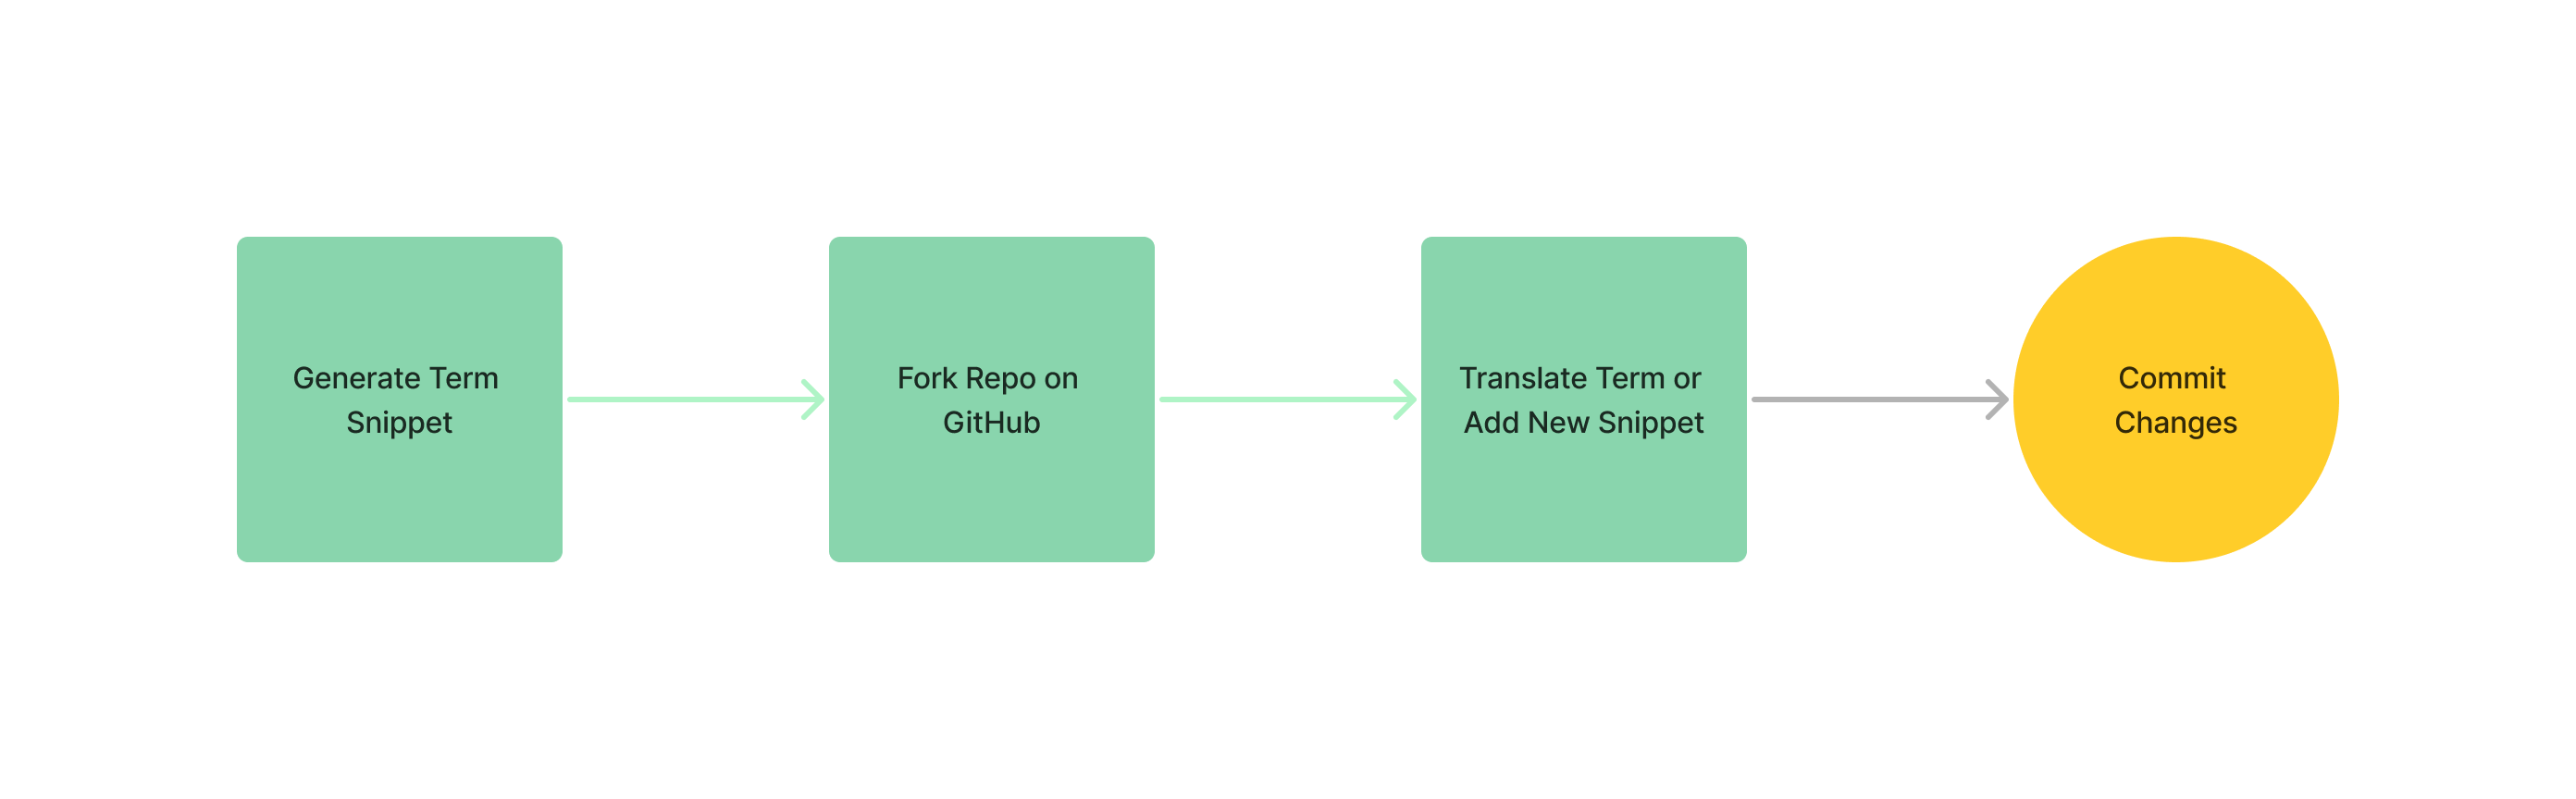 A diagram describing systemic work with term files and snippets